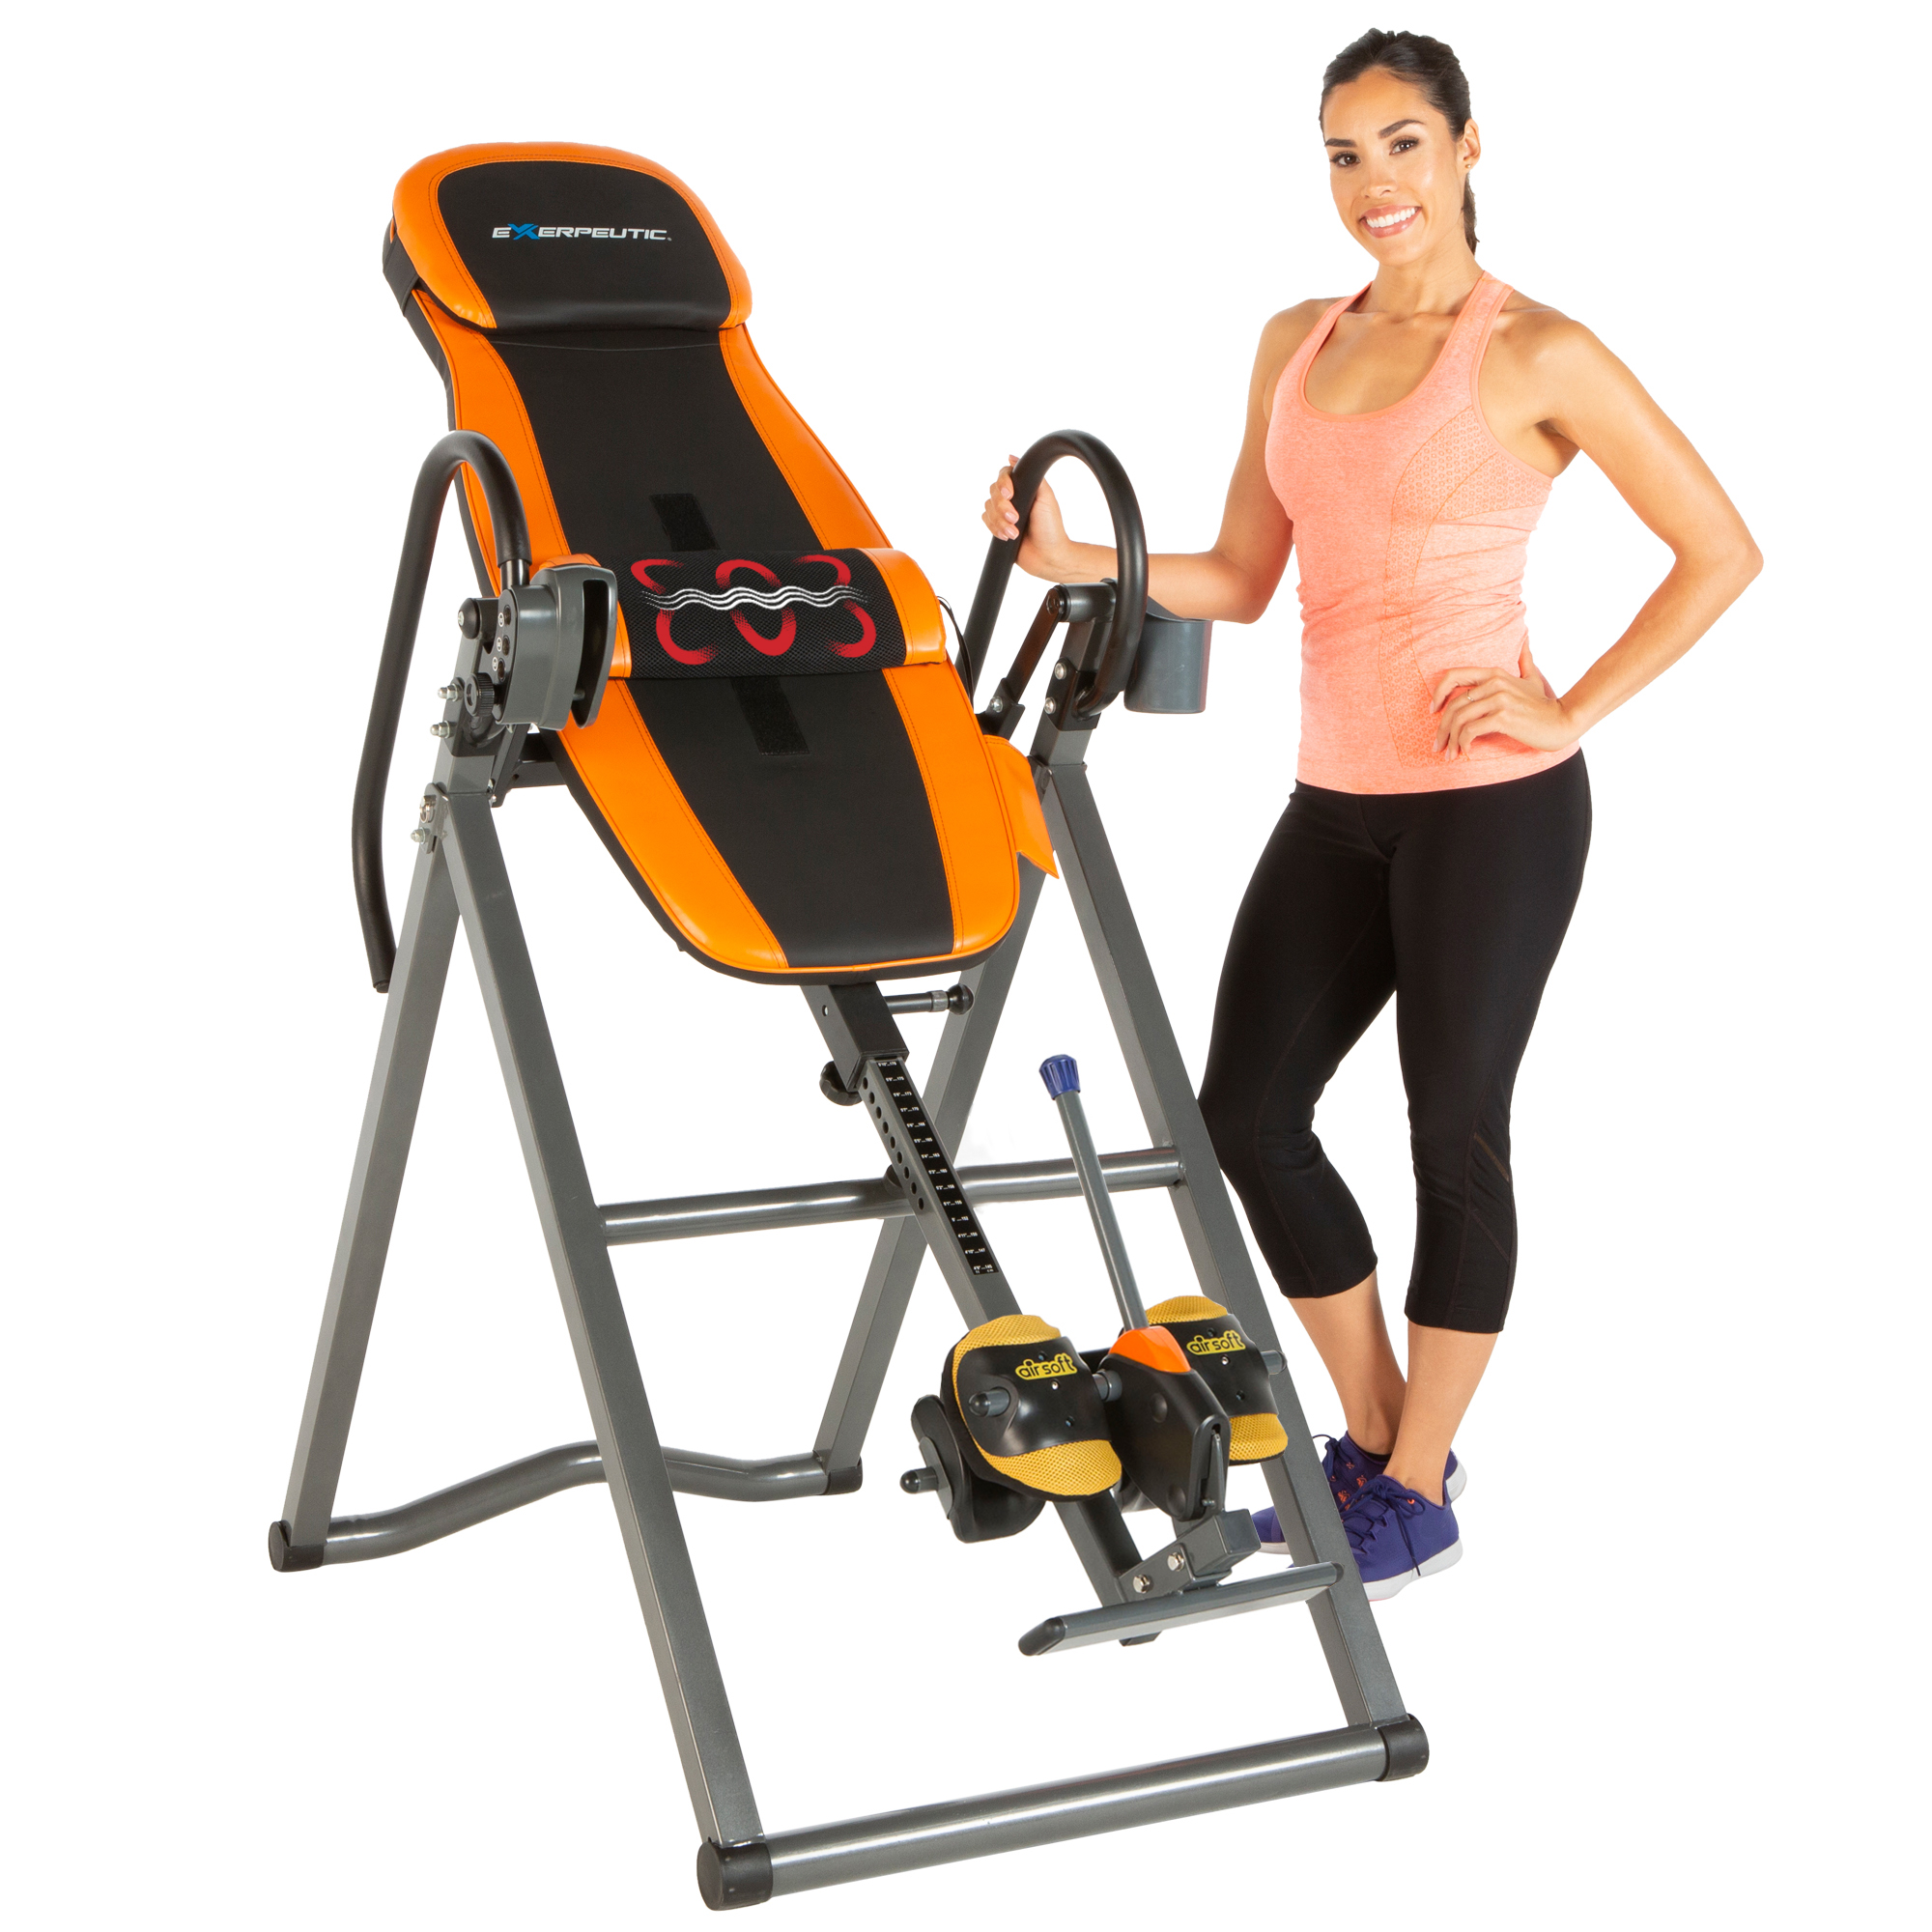 EXERPEUTIC 375SL UL Certified Heat and Massage Therapy Inversion Table with AIRSOFT No Pinch Ankle Holders and 'Surelock' Locking System - image 1 of 23